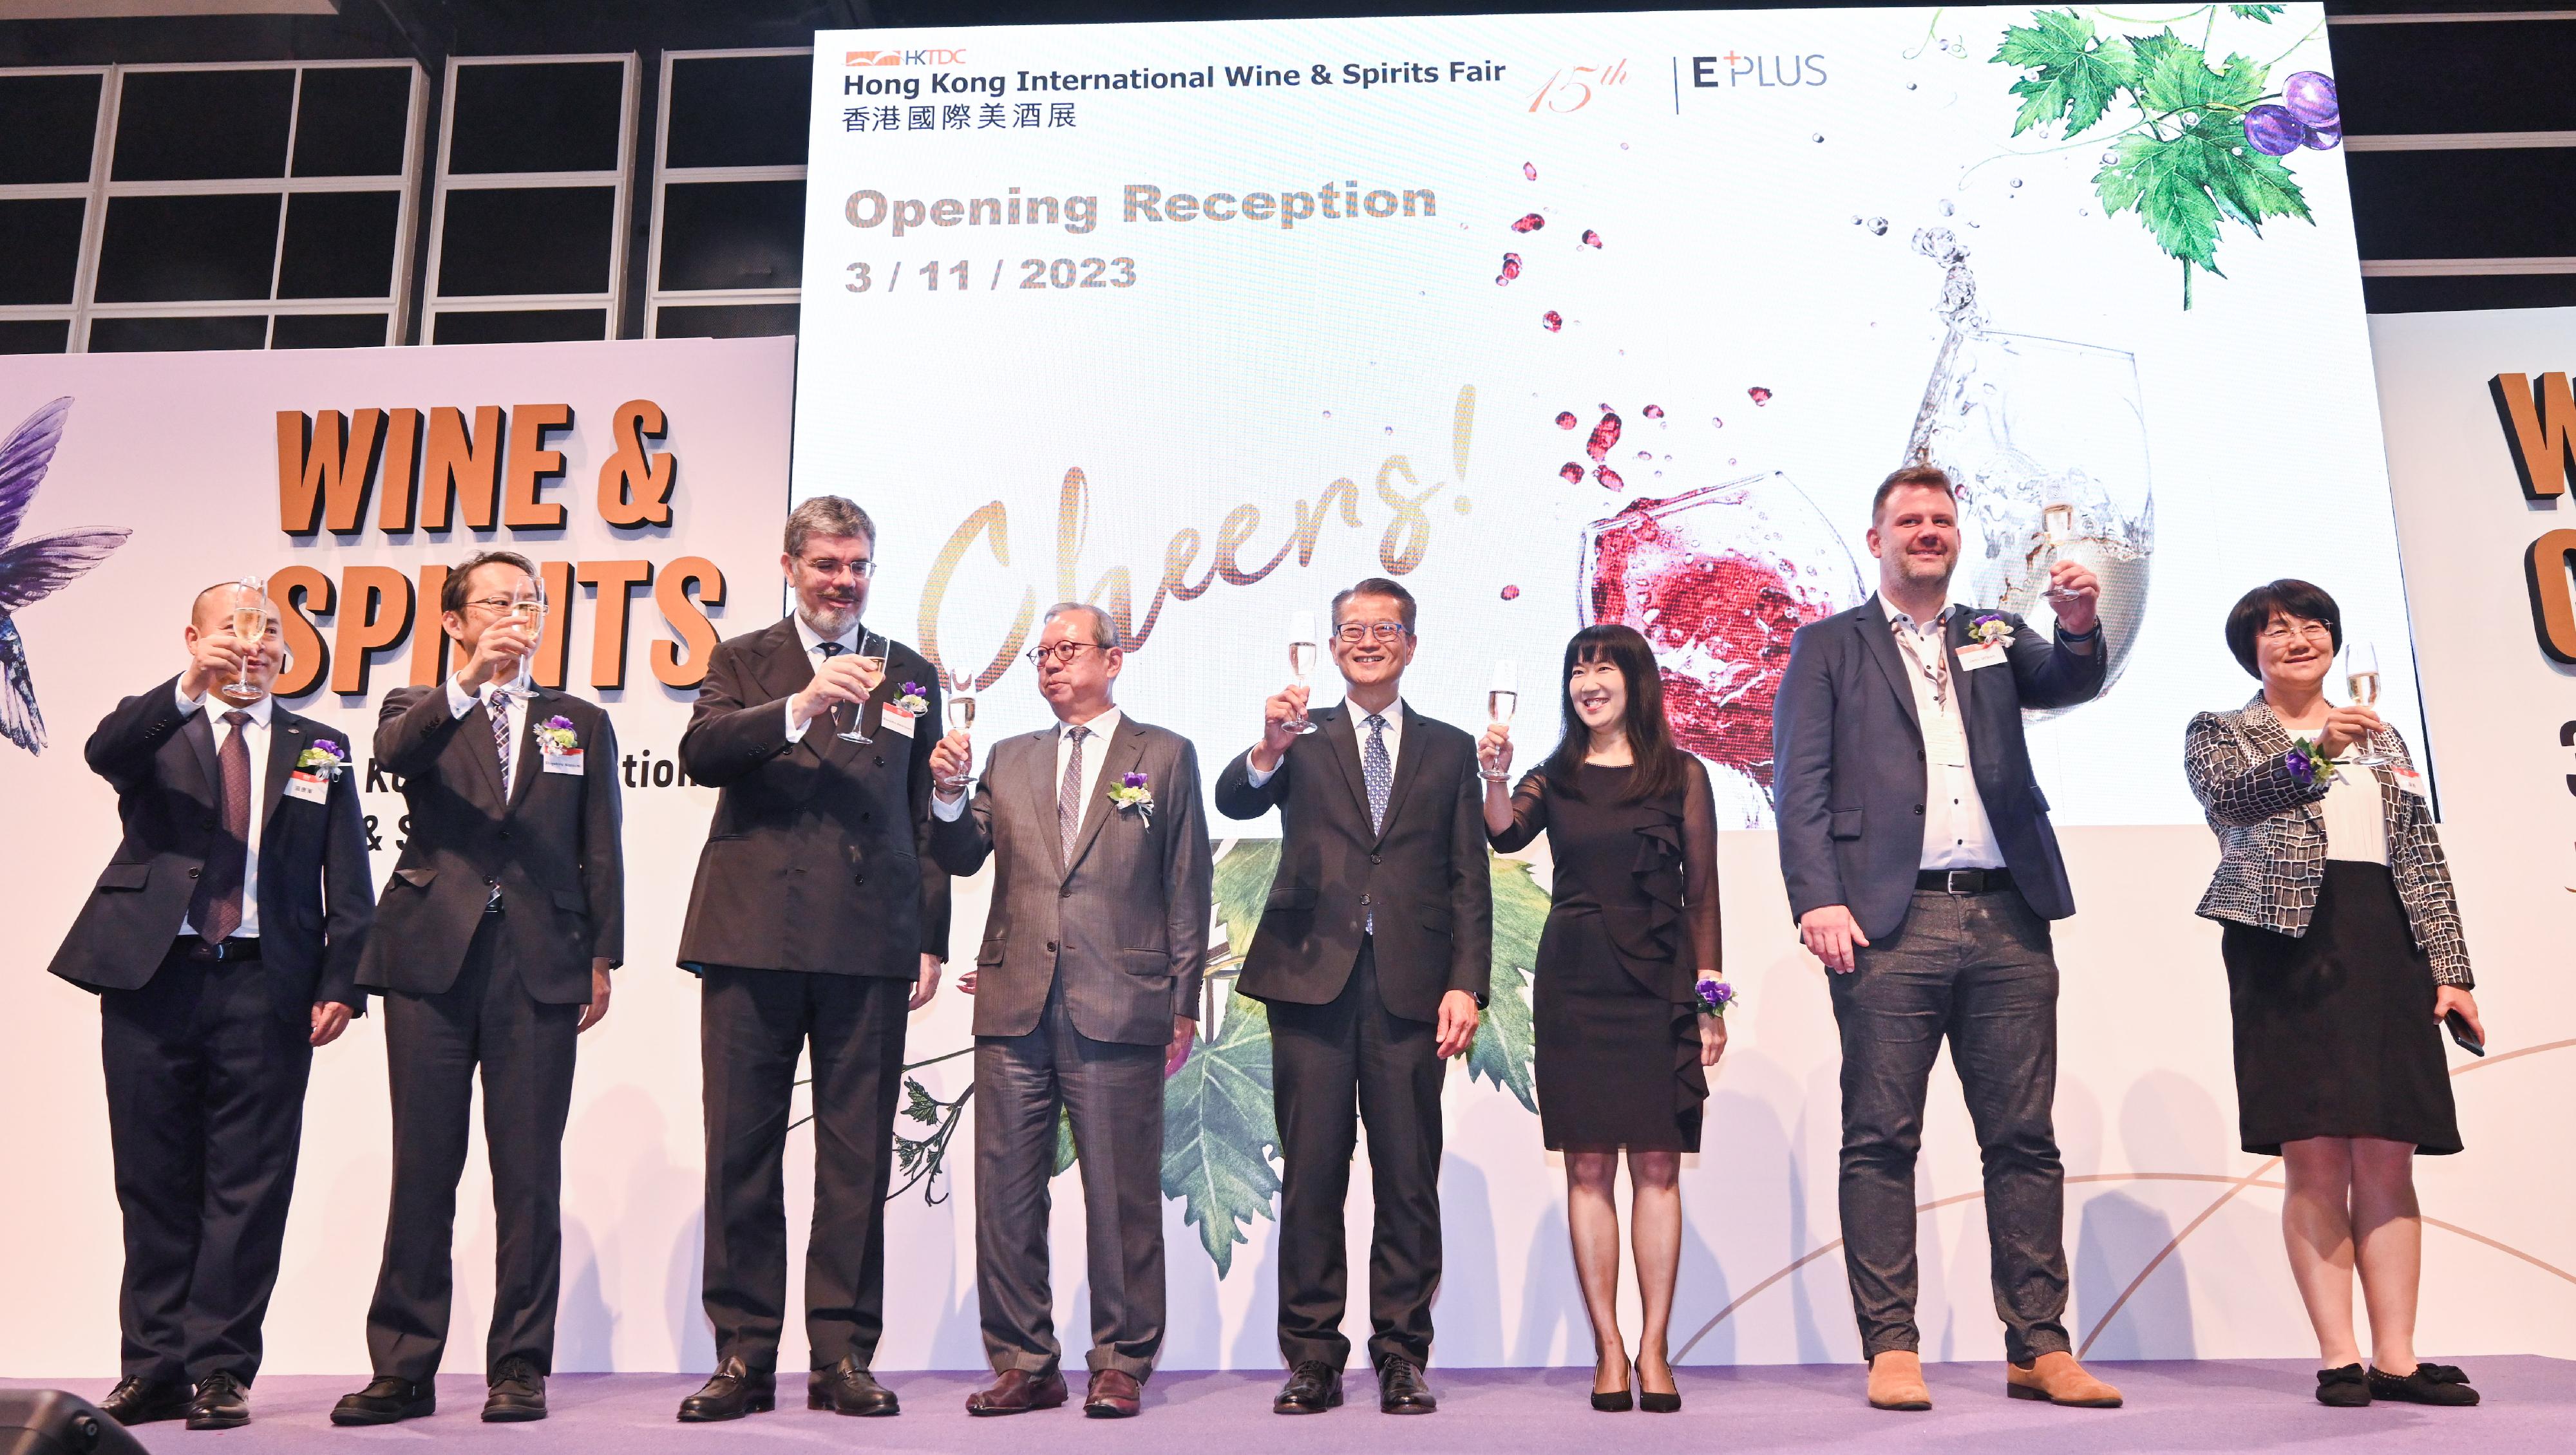 The Financial Secretary, Mr Paul Chan, attended the Hong Kong International Wine & Spirits Fair 2023 today (November 3). Photo shows Mr Chan (fourth right); the Chairman of the Hong Kong Trade Development Council, Dr Peter Lam (fourth left); the Executive Director of the Hong Kong Trade Development Council, Ms Margaret Fong (third right), and other guests proposing a toast.